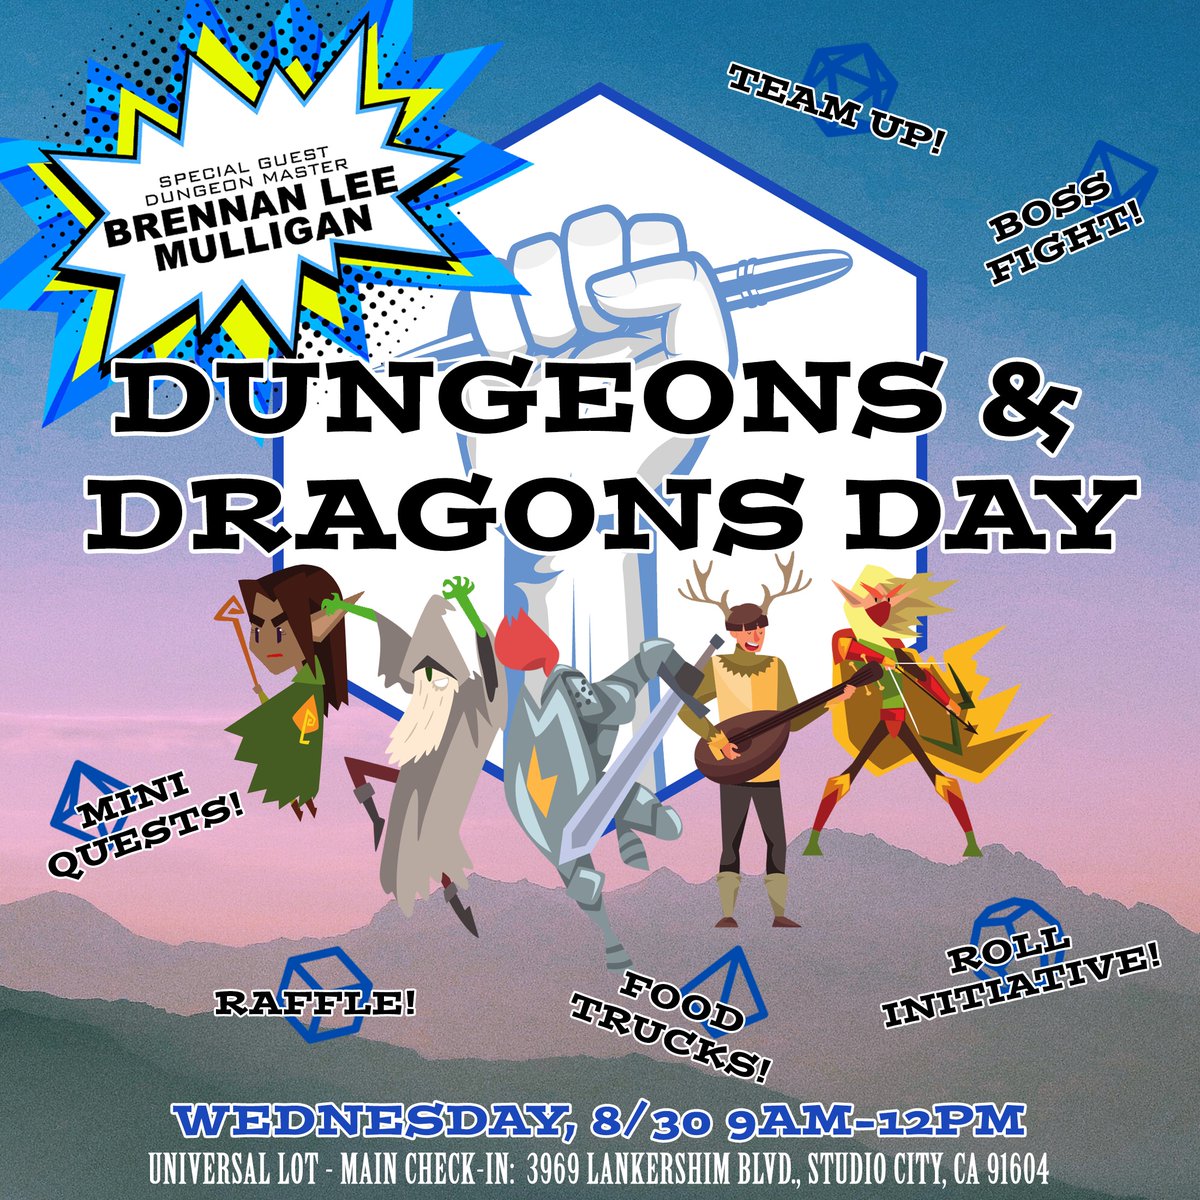 OH HEY I woke up really excited to share more stuff for DUNGEONS & DRAGONS PICKETING DAY!!! Reminder, all this fun will be happening Wednesday, 8/30!! #dndwgapicket